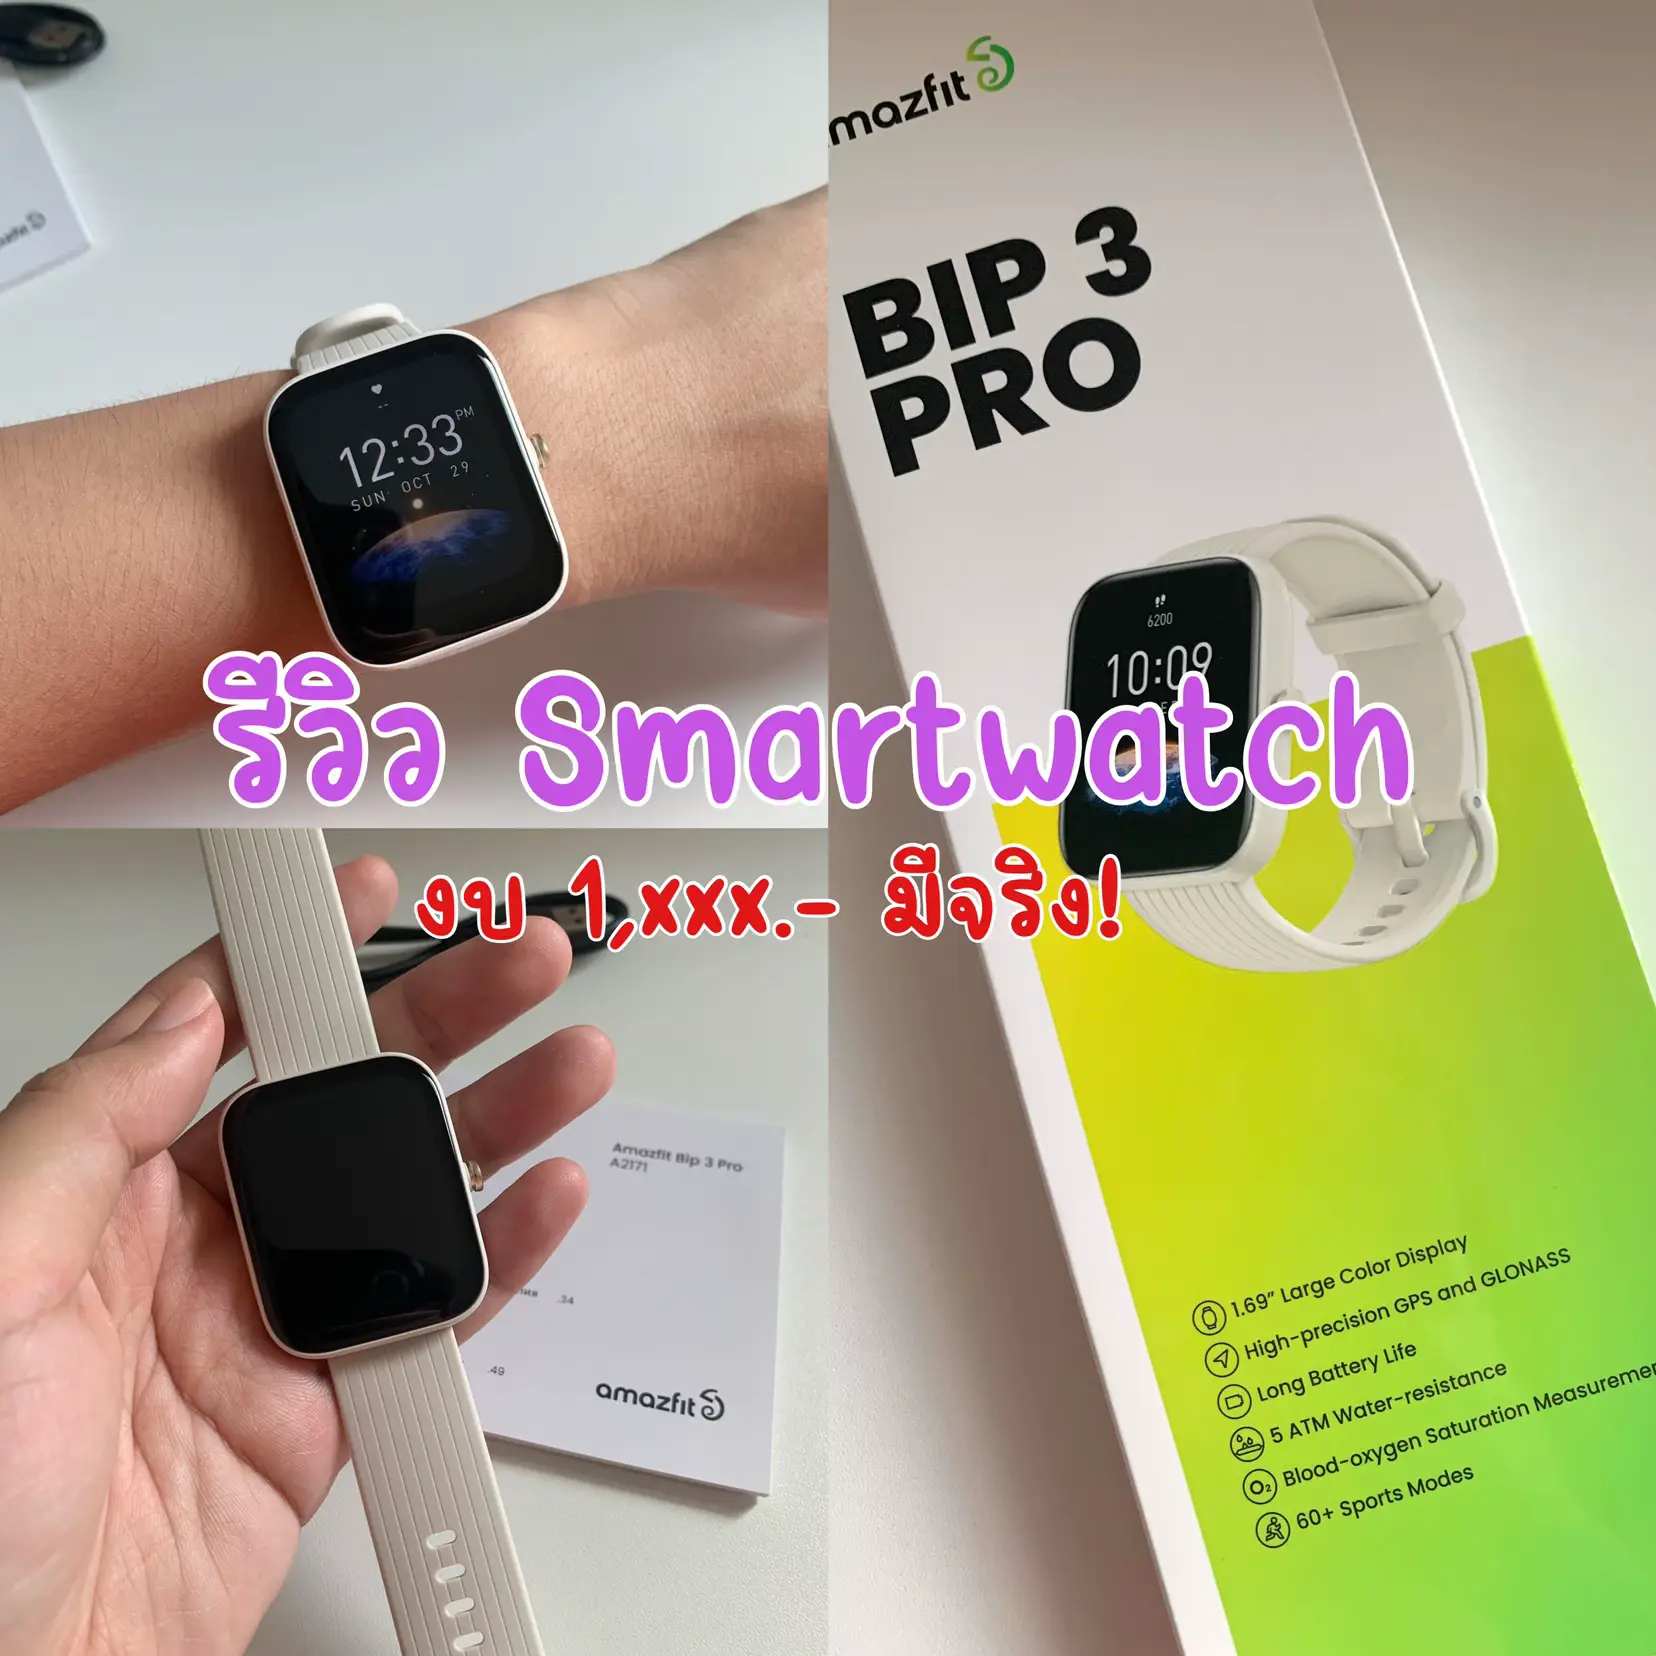 2023 New Amazfit Bip 3 Pro Smartwatch GPS 1.69'' Large Color Display 60+  Sports Watch Modes Smart Watch For Android IOS Phone